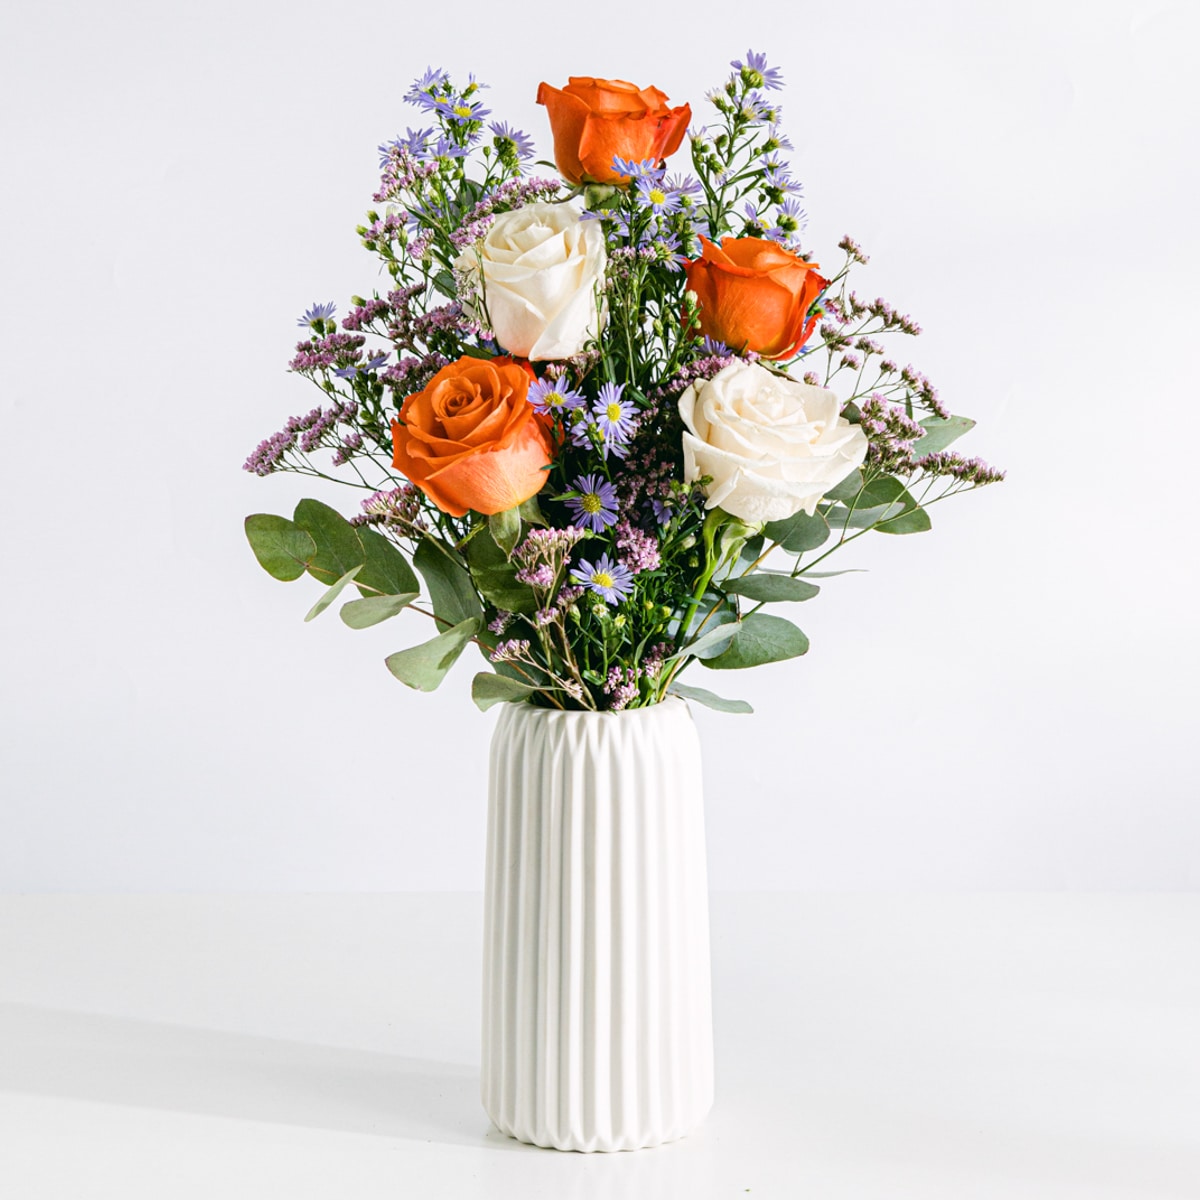 Flower bouquet including white roses, orange and aster with vase